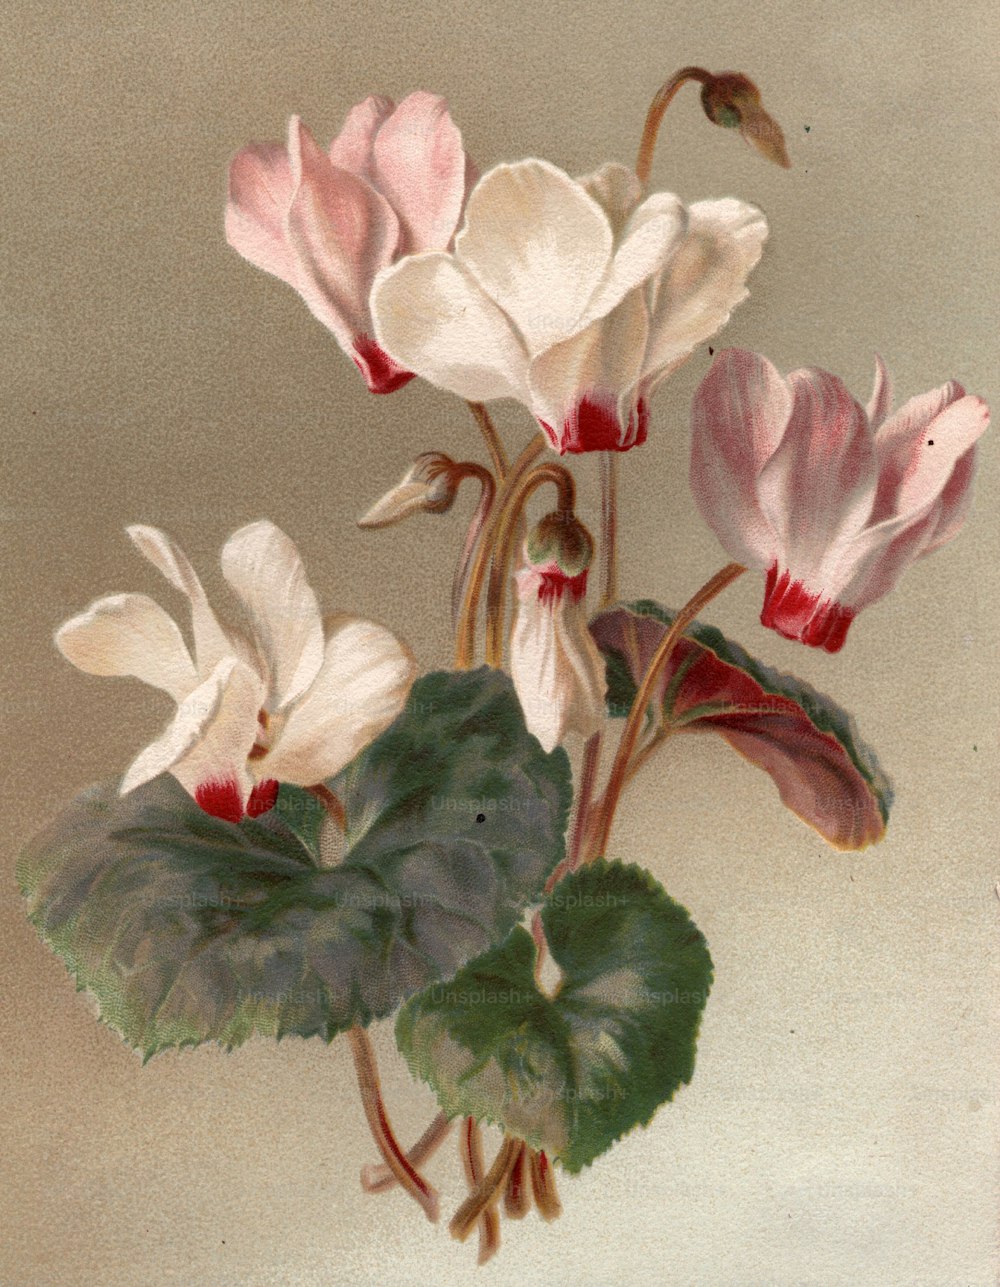 circa 1800:  Flowers of the cyclamen family.  (Photo by Hulton Archive/Getty Images)